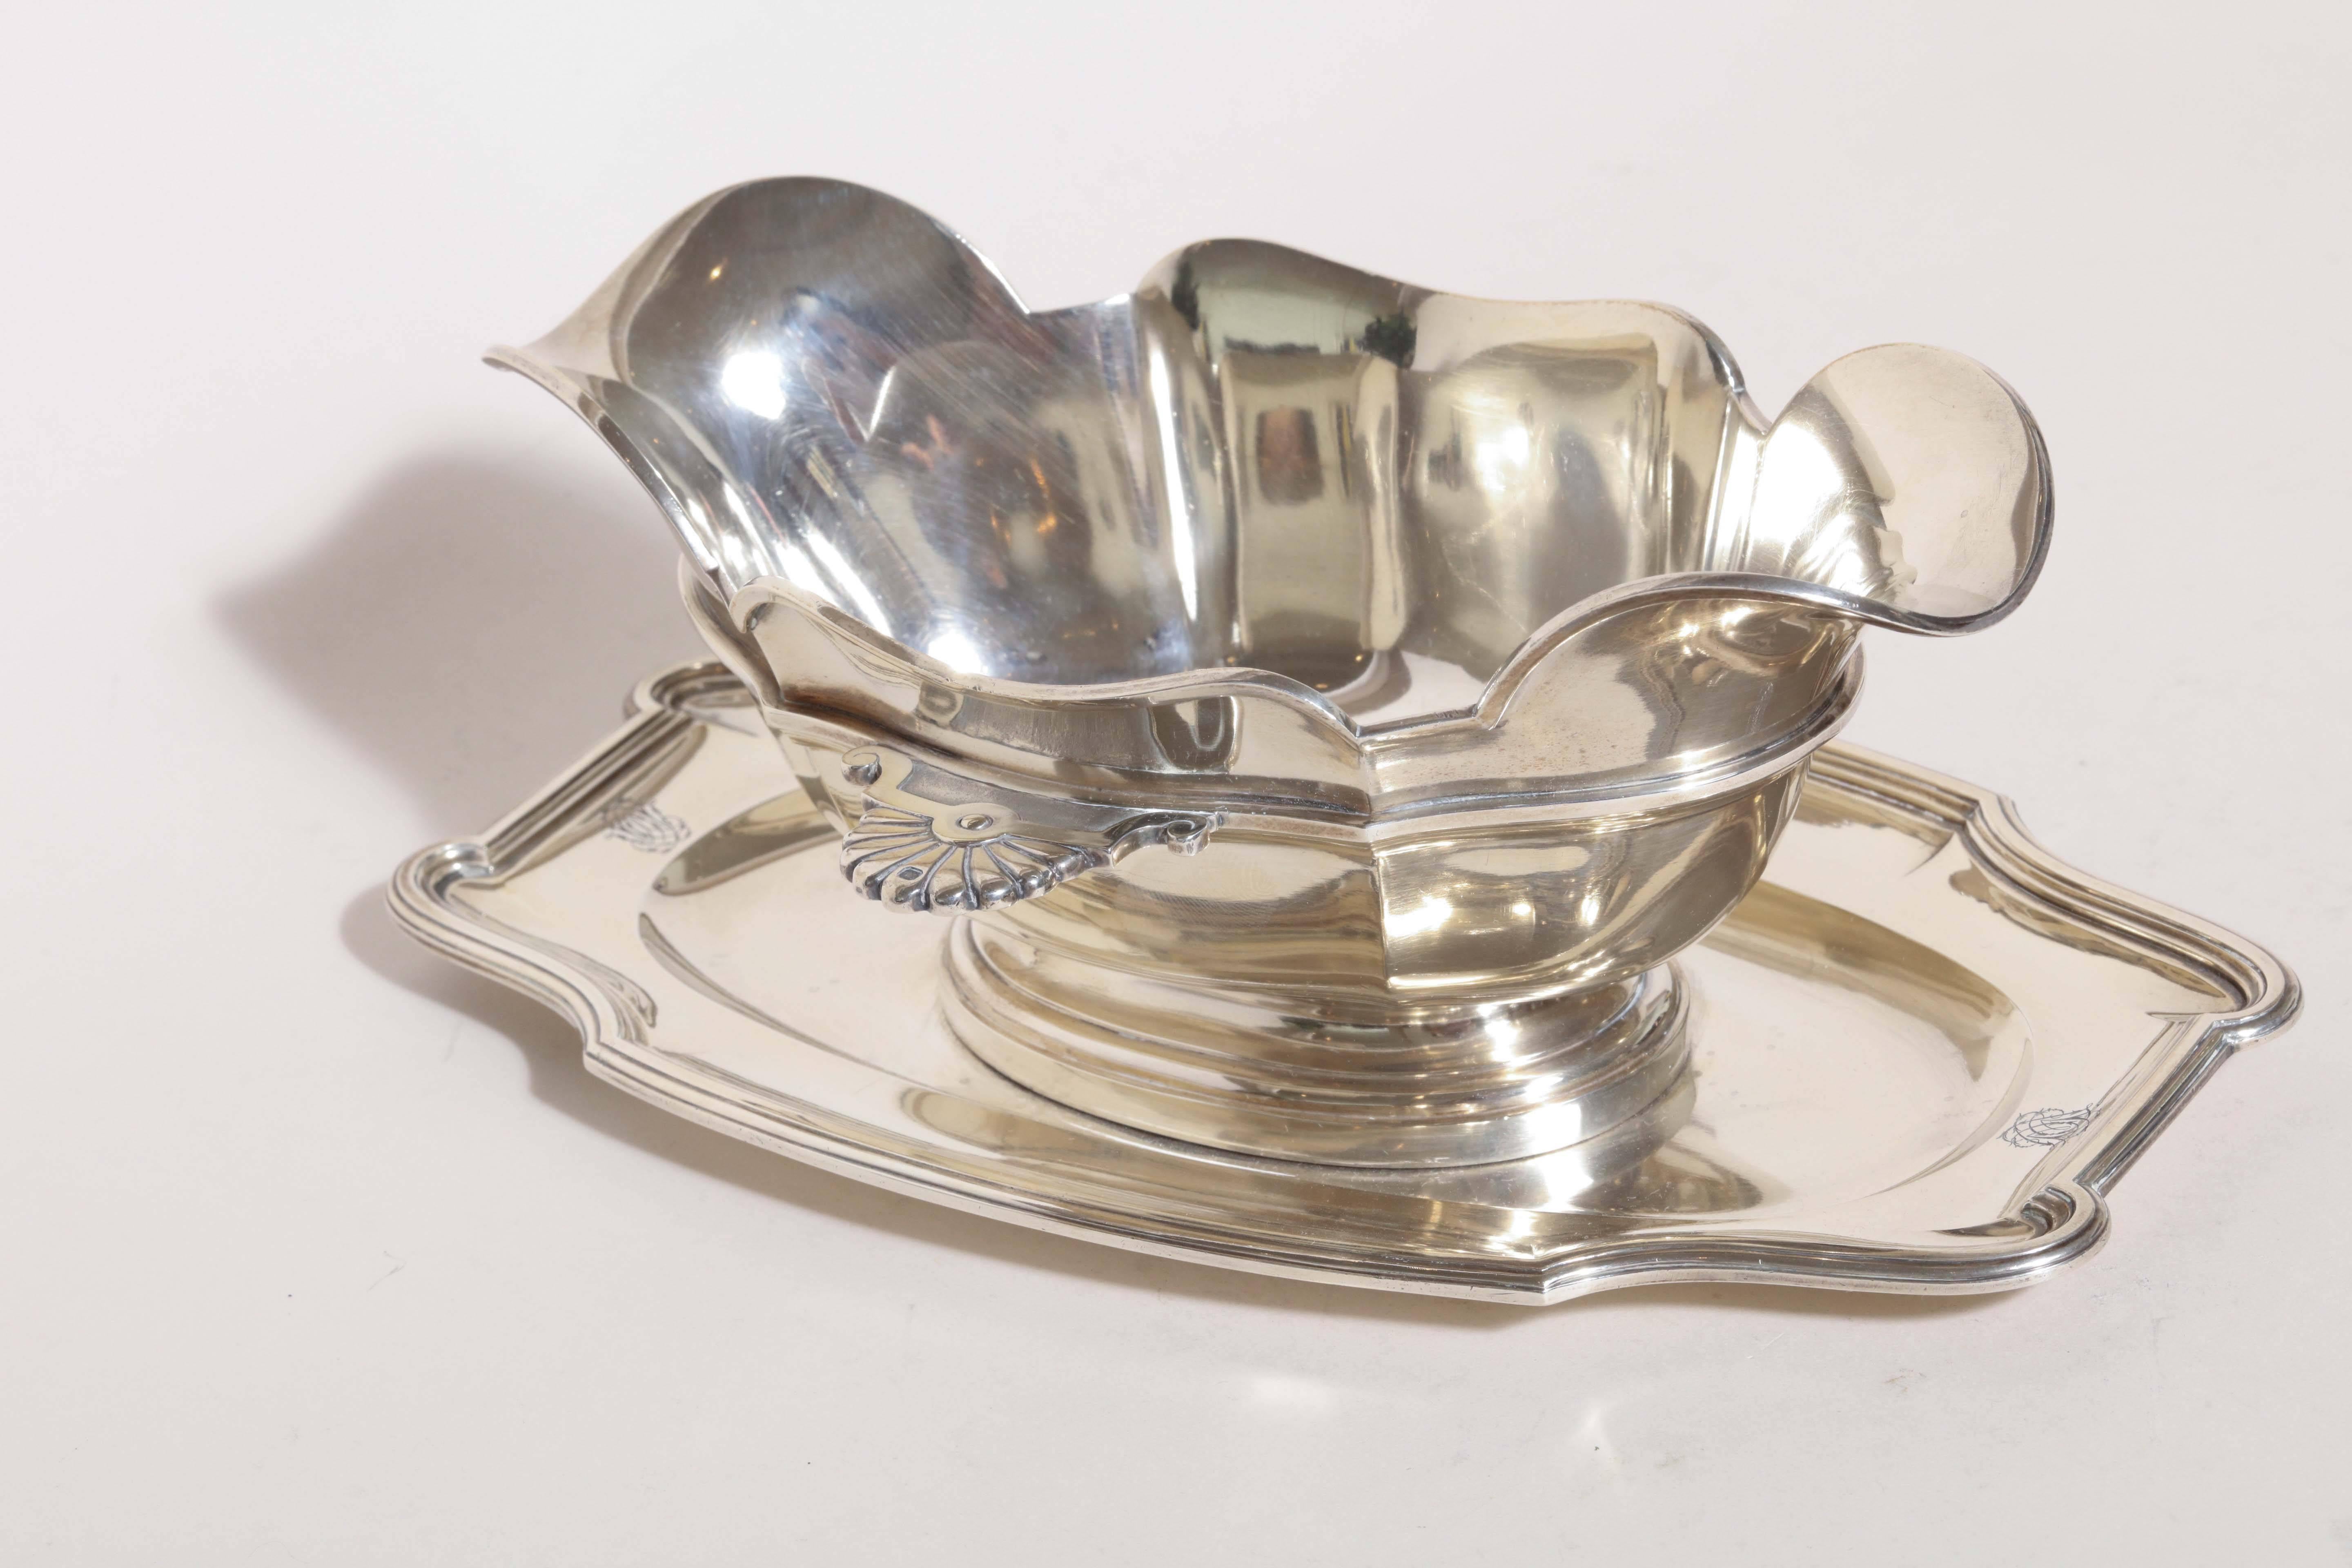 Robert Linzeler French Art Deco Silver Sauciere Mounted on Tray In Excellent Condition For Sale In New York, NY